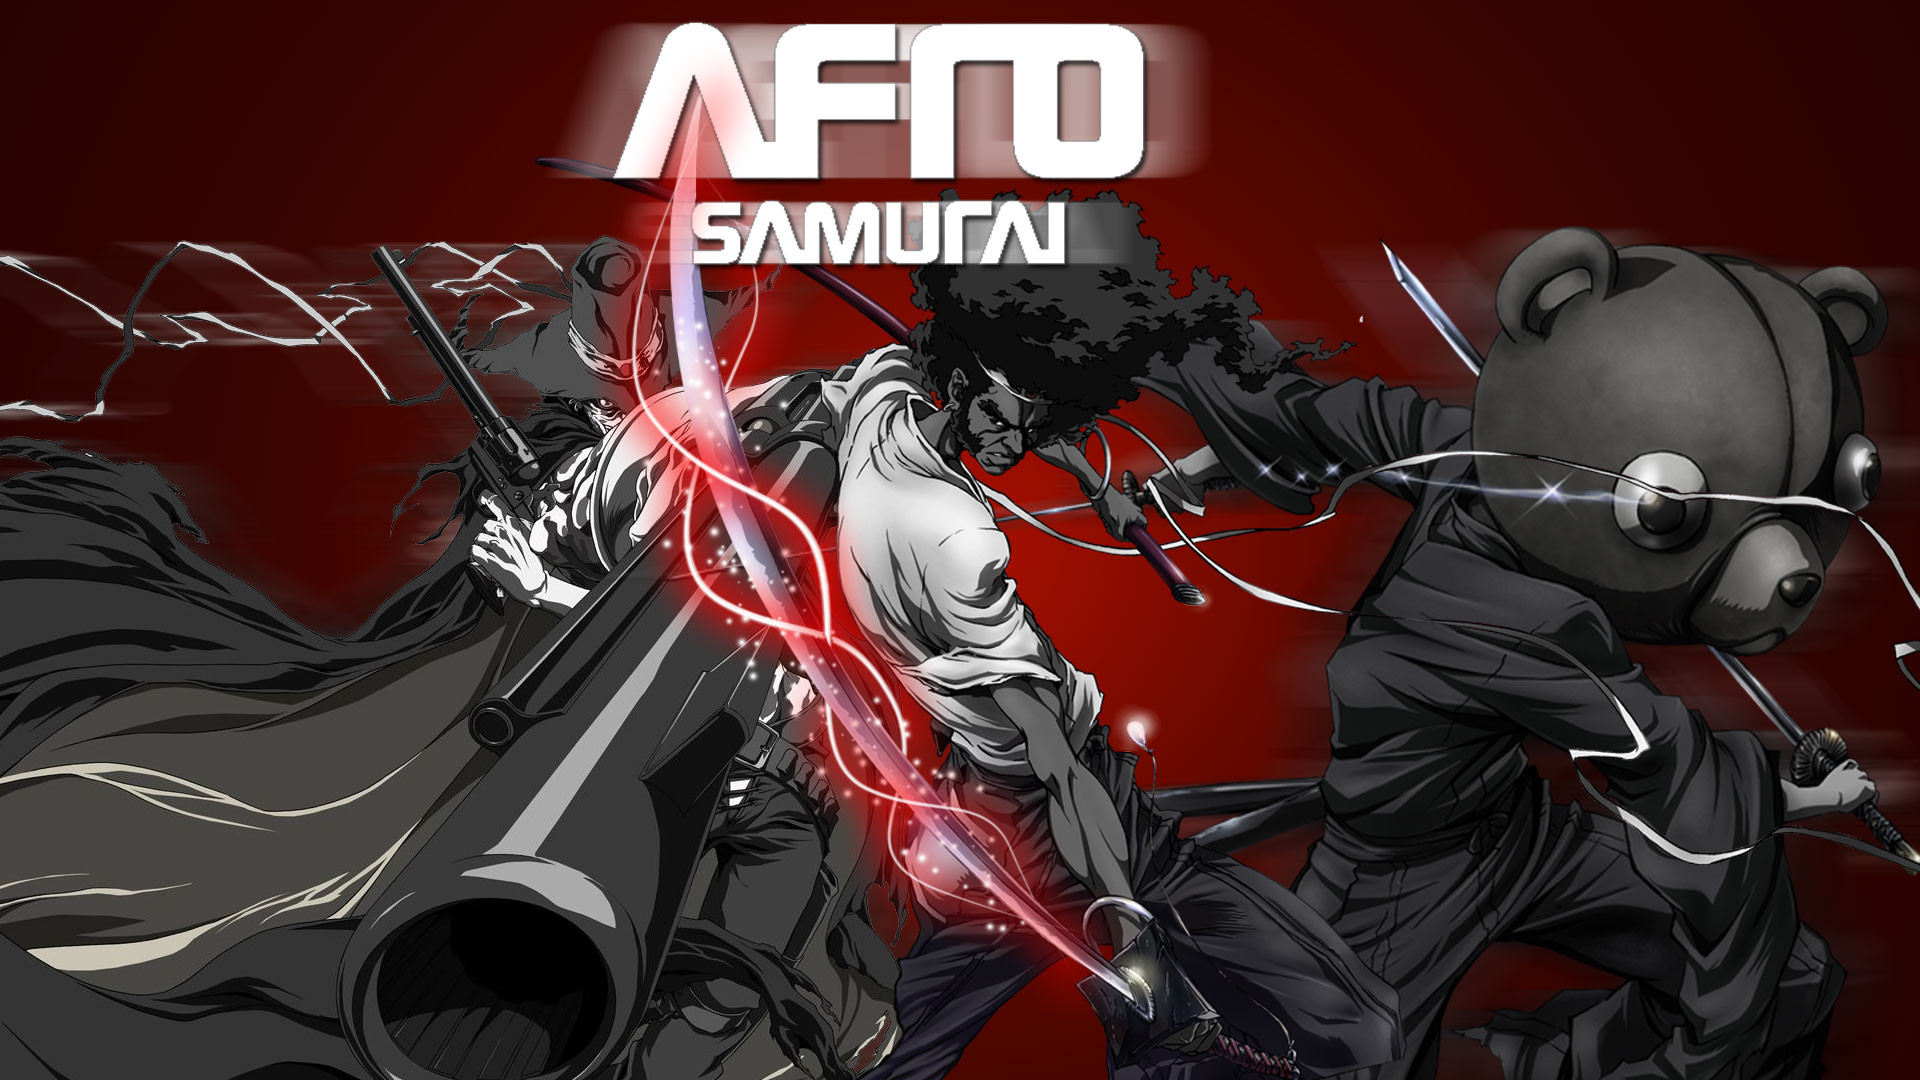 1920x1080 afro samurai wallpaper download free hd wallpapers desktop images free  windows wallpapers amazing colourful 4k picture lovely 1920Ã1080 Wallpaper  HD